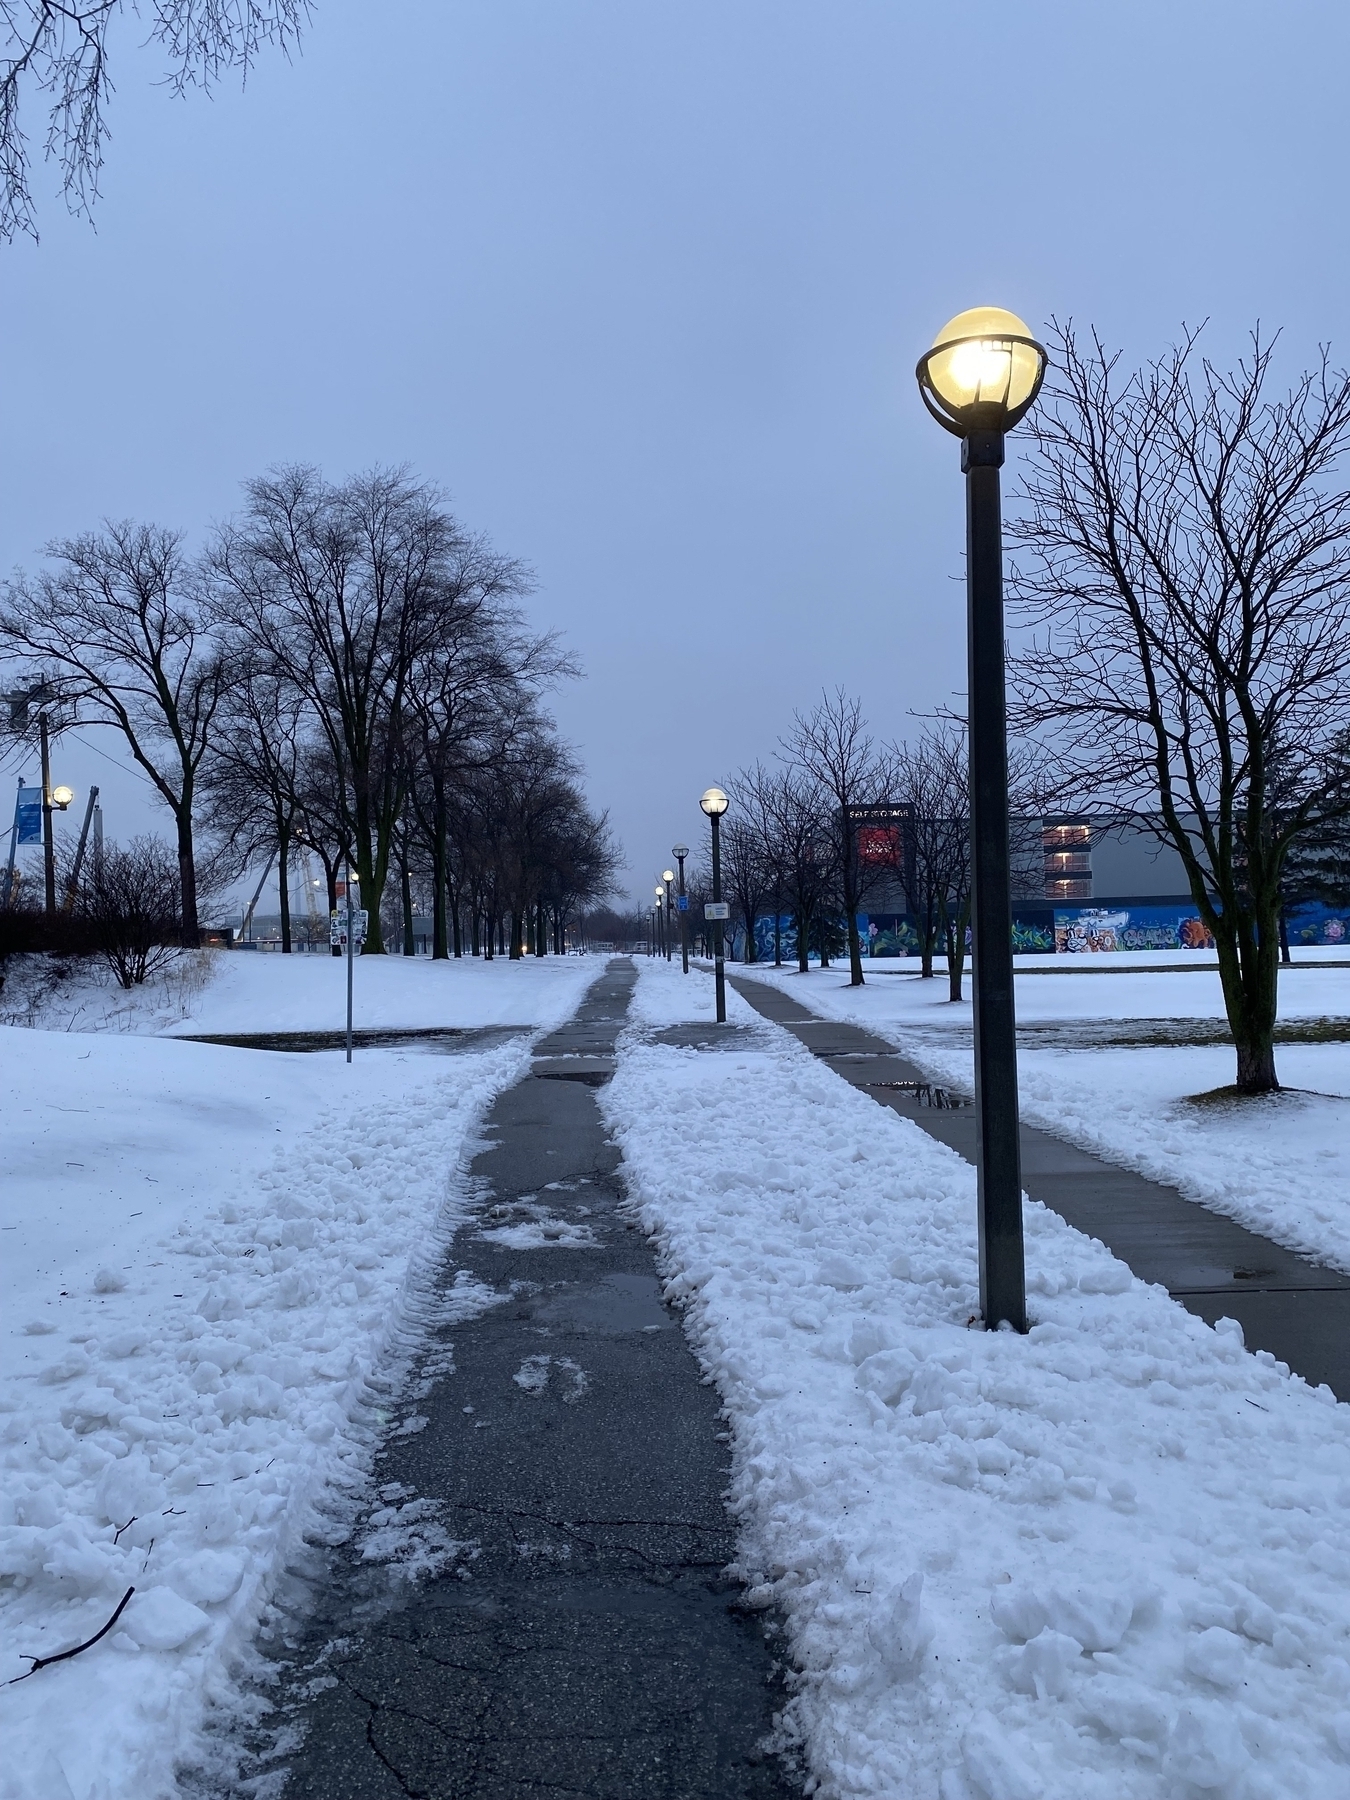 An empty path through the snow with street lights